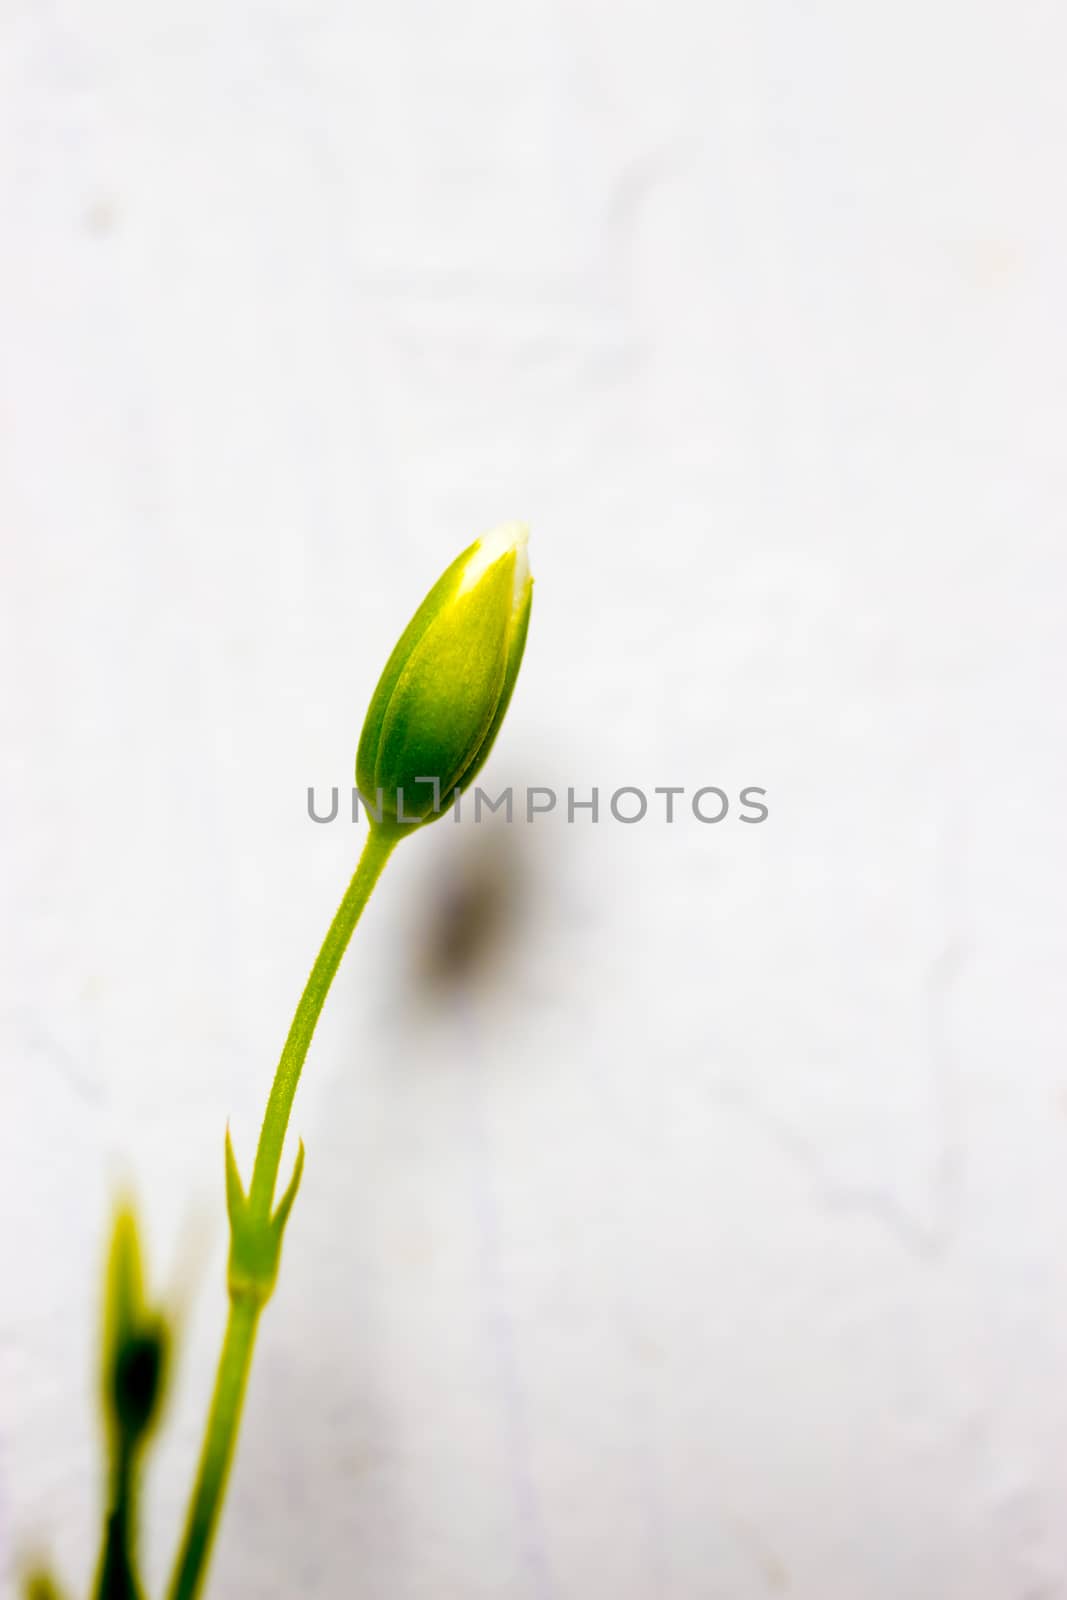 Green flower stem with yellow and white flower bud with a destressed look background